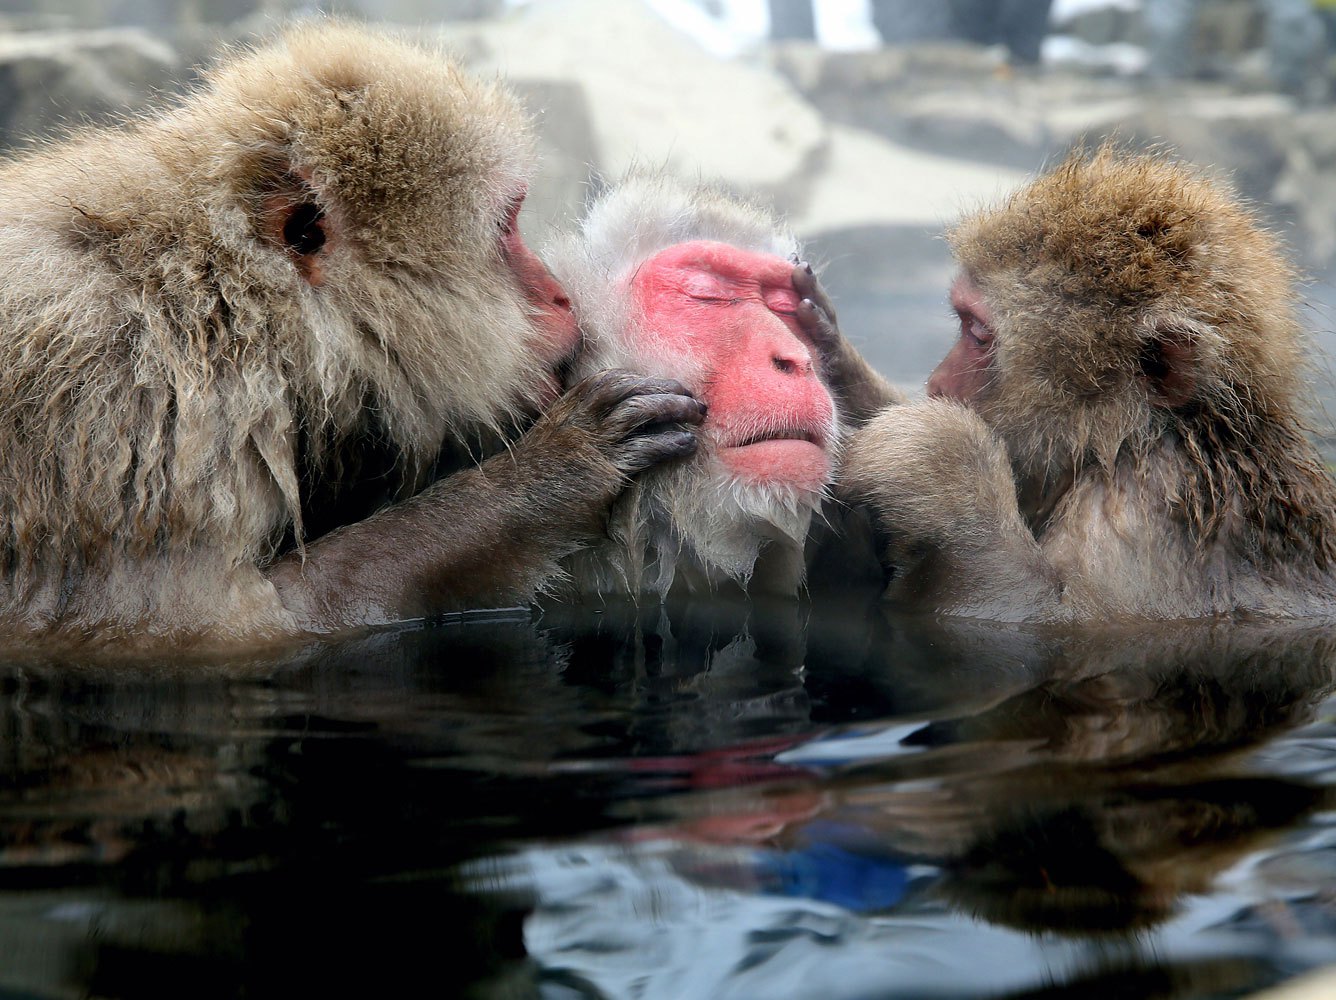 Japanese Macaque monkeys groom each other and relax in a hot spring at the Jigokudani, or Hell's Valley Monkey Park on Jan. 8, 2014 in Yamanouchi, Nagano, Japan.